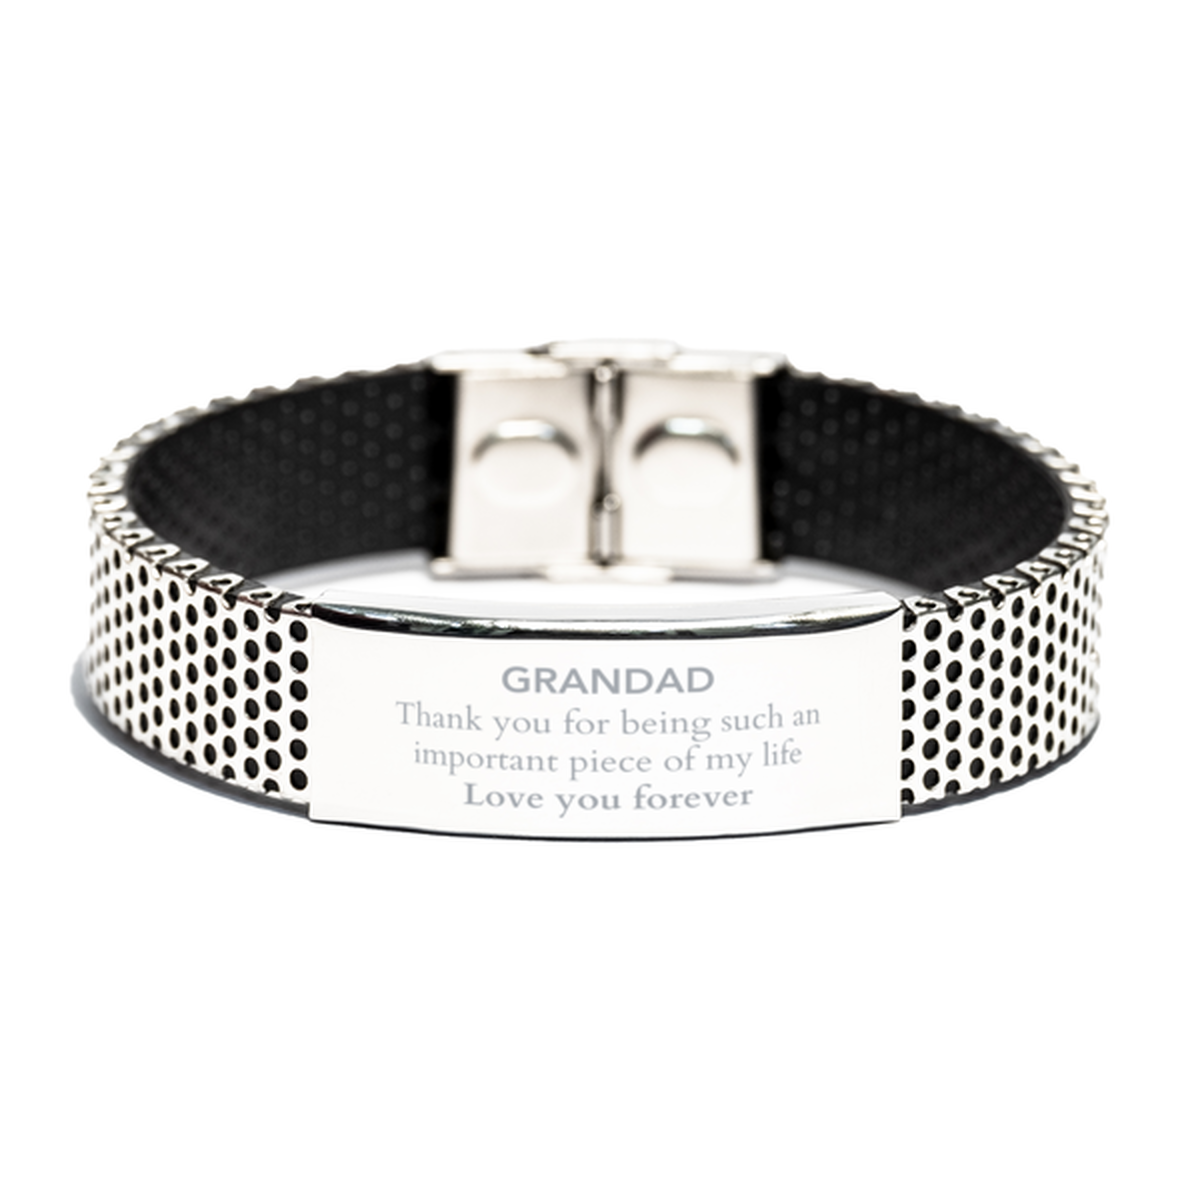 Appropriate Grandad Stainless Steel Bracelet Epic Birthday Gifts for Grandad Thank you for being such an important piece of my life Grandad Christmas Mothers Fathers Day